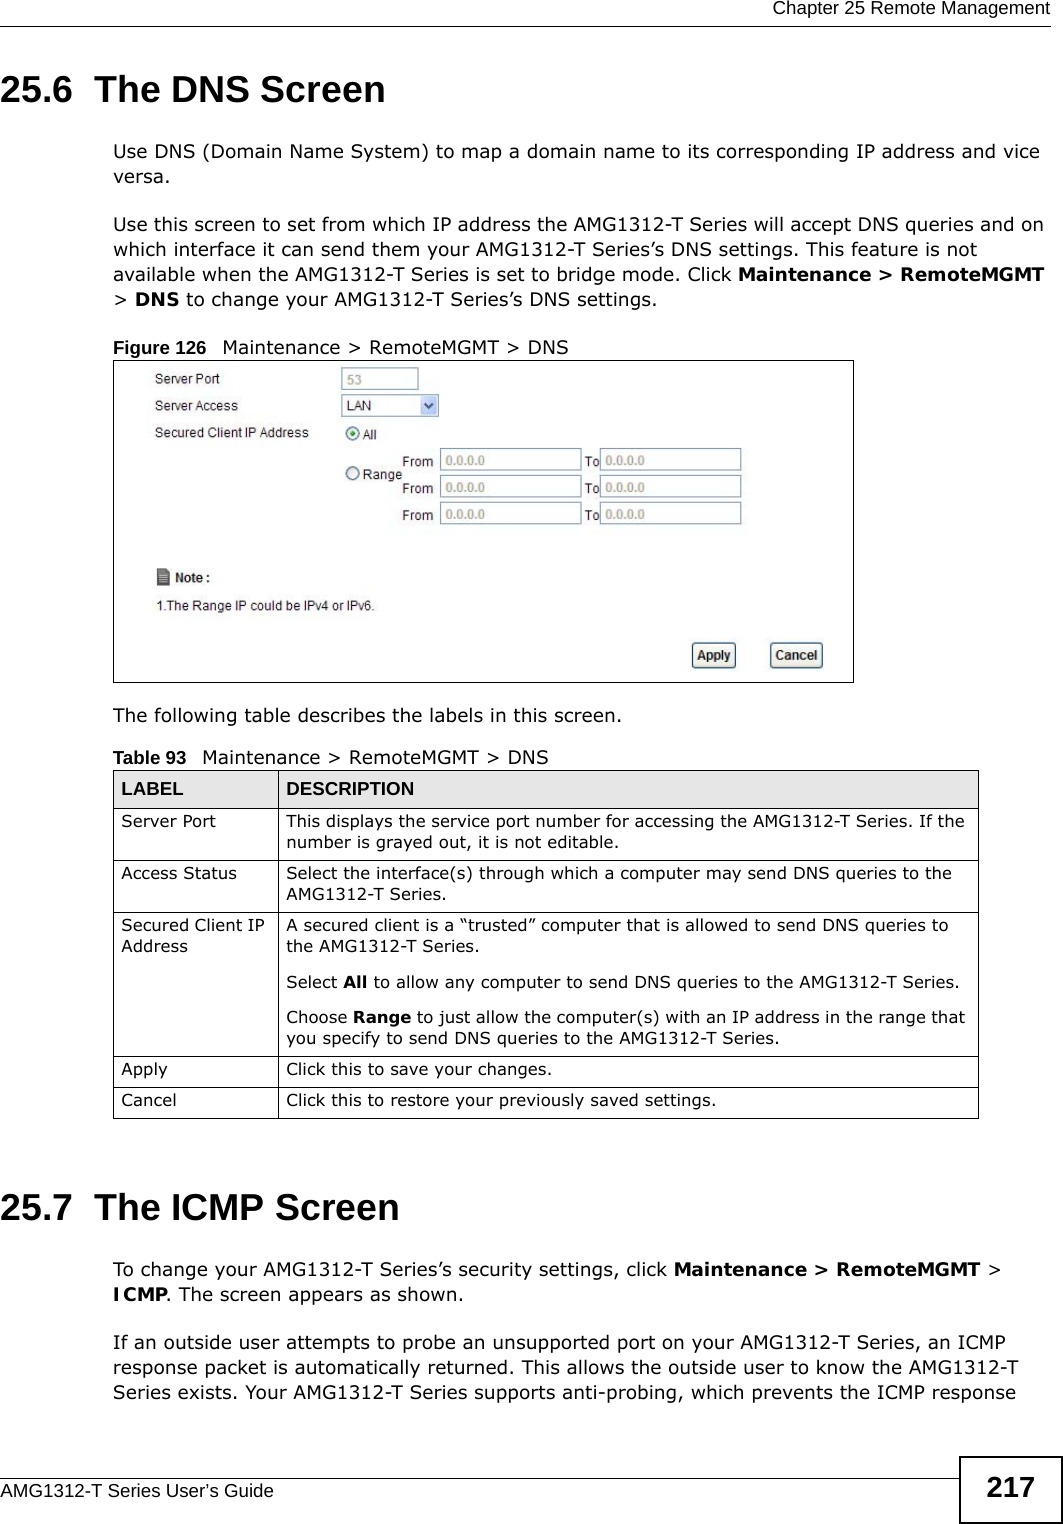  Chapter 25 Remote ManagementAMG1312-T Series User’s Guide 21725.6  The DNS Screen Use DNS (Domain Name System) to map a domain name to its corresponding IP address and vice versa.Use this screen to set from which IP address the AMG1312-T Series will accept DNS queries and on which interface it can send them your AMG1312-T Series’s DNS settings. This feature is not available when the AMG1312-T Series is set to bridge mode. Click Maintenance &gt; RemoteMGMT &gt; DNS to change your AMG1312-T Series’s DNS settings.Figure 126   Maintenance &gt; RemoteMGMT &gt; DNSThe following table describes the labels in this screen.25.7  The ICMP ScreenTo change your AMG1312-T Series’s security settings, click Maintenance &gt; RemoteMGMT &gt; ICMP. The screen appears as shown.If an outside user attempts to probe an unsupported port on your AMG1312-T Series, an ICMP response packet is automatically returned. This allows the outside user to know the AMG1312-T Series exists. Your AMG1312-T Series supports anti-probing, which prevents the ICMP response Table 93   Maintenance &gt; RemoteMGMT &gt; DNSLABEL DESCRIPTIONServer Port This displays the service port number for accessing the AMG1312-T Series. If the number is grayed out, it is not editable.Access Status Select the interface(s) through which a computer may send DNS queries to the AMG1312-T Series.Secured Client IP AddressA secured client is a “trusted” computer that is allowed to send DNS queries to the AMG1312-T Series.Select All to allow any computer to send DNS queries to the AMG1312-T Series.Choose Range to just allow the computer(s) with an IP address in the range that you specify to send DNS queries to the AMG1312-T Series.Apply Click this to save your changes.Cancel Click this to restore your previously saved settings.